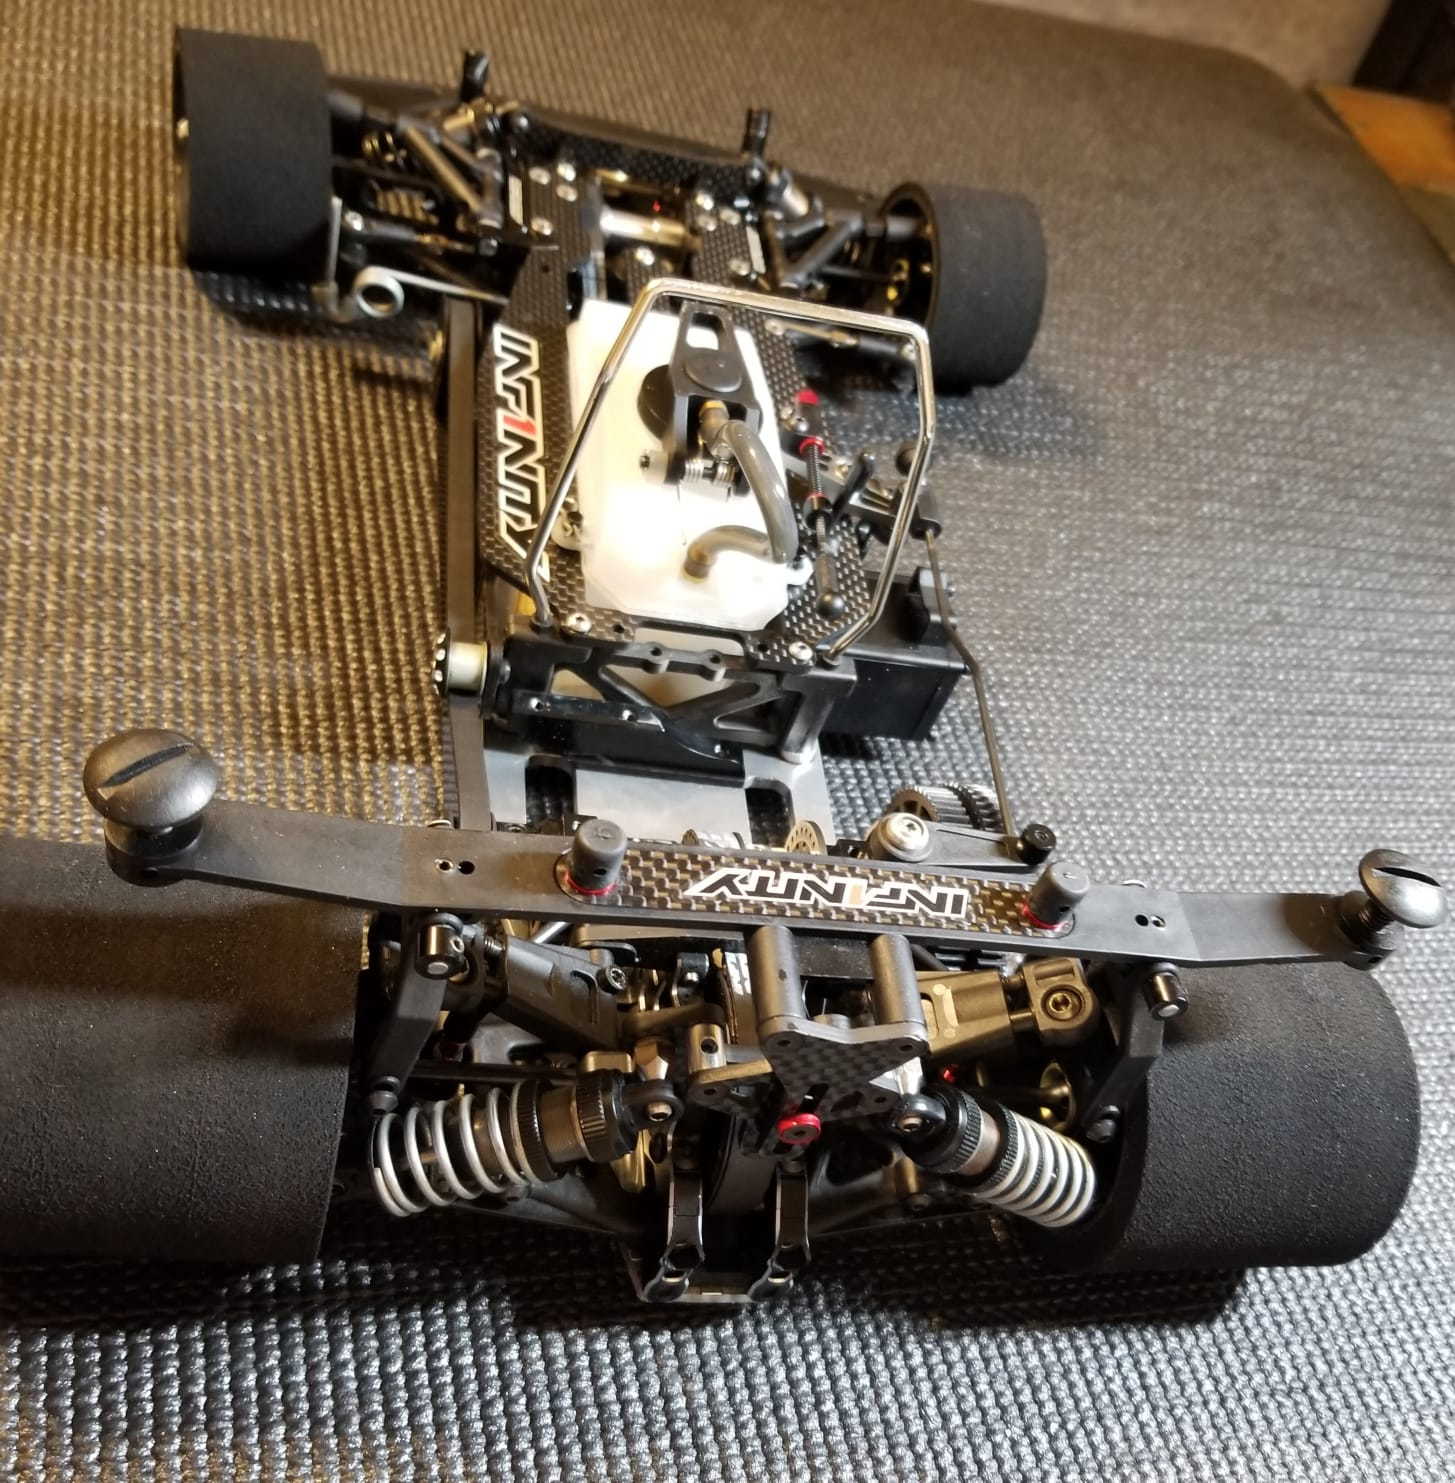 Infinity IF18 kit and spare parts for sale - R/C Tech Forums